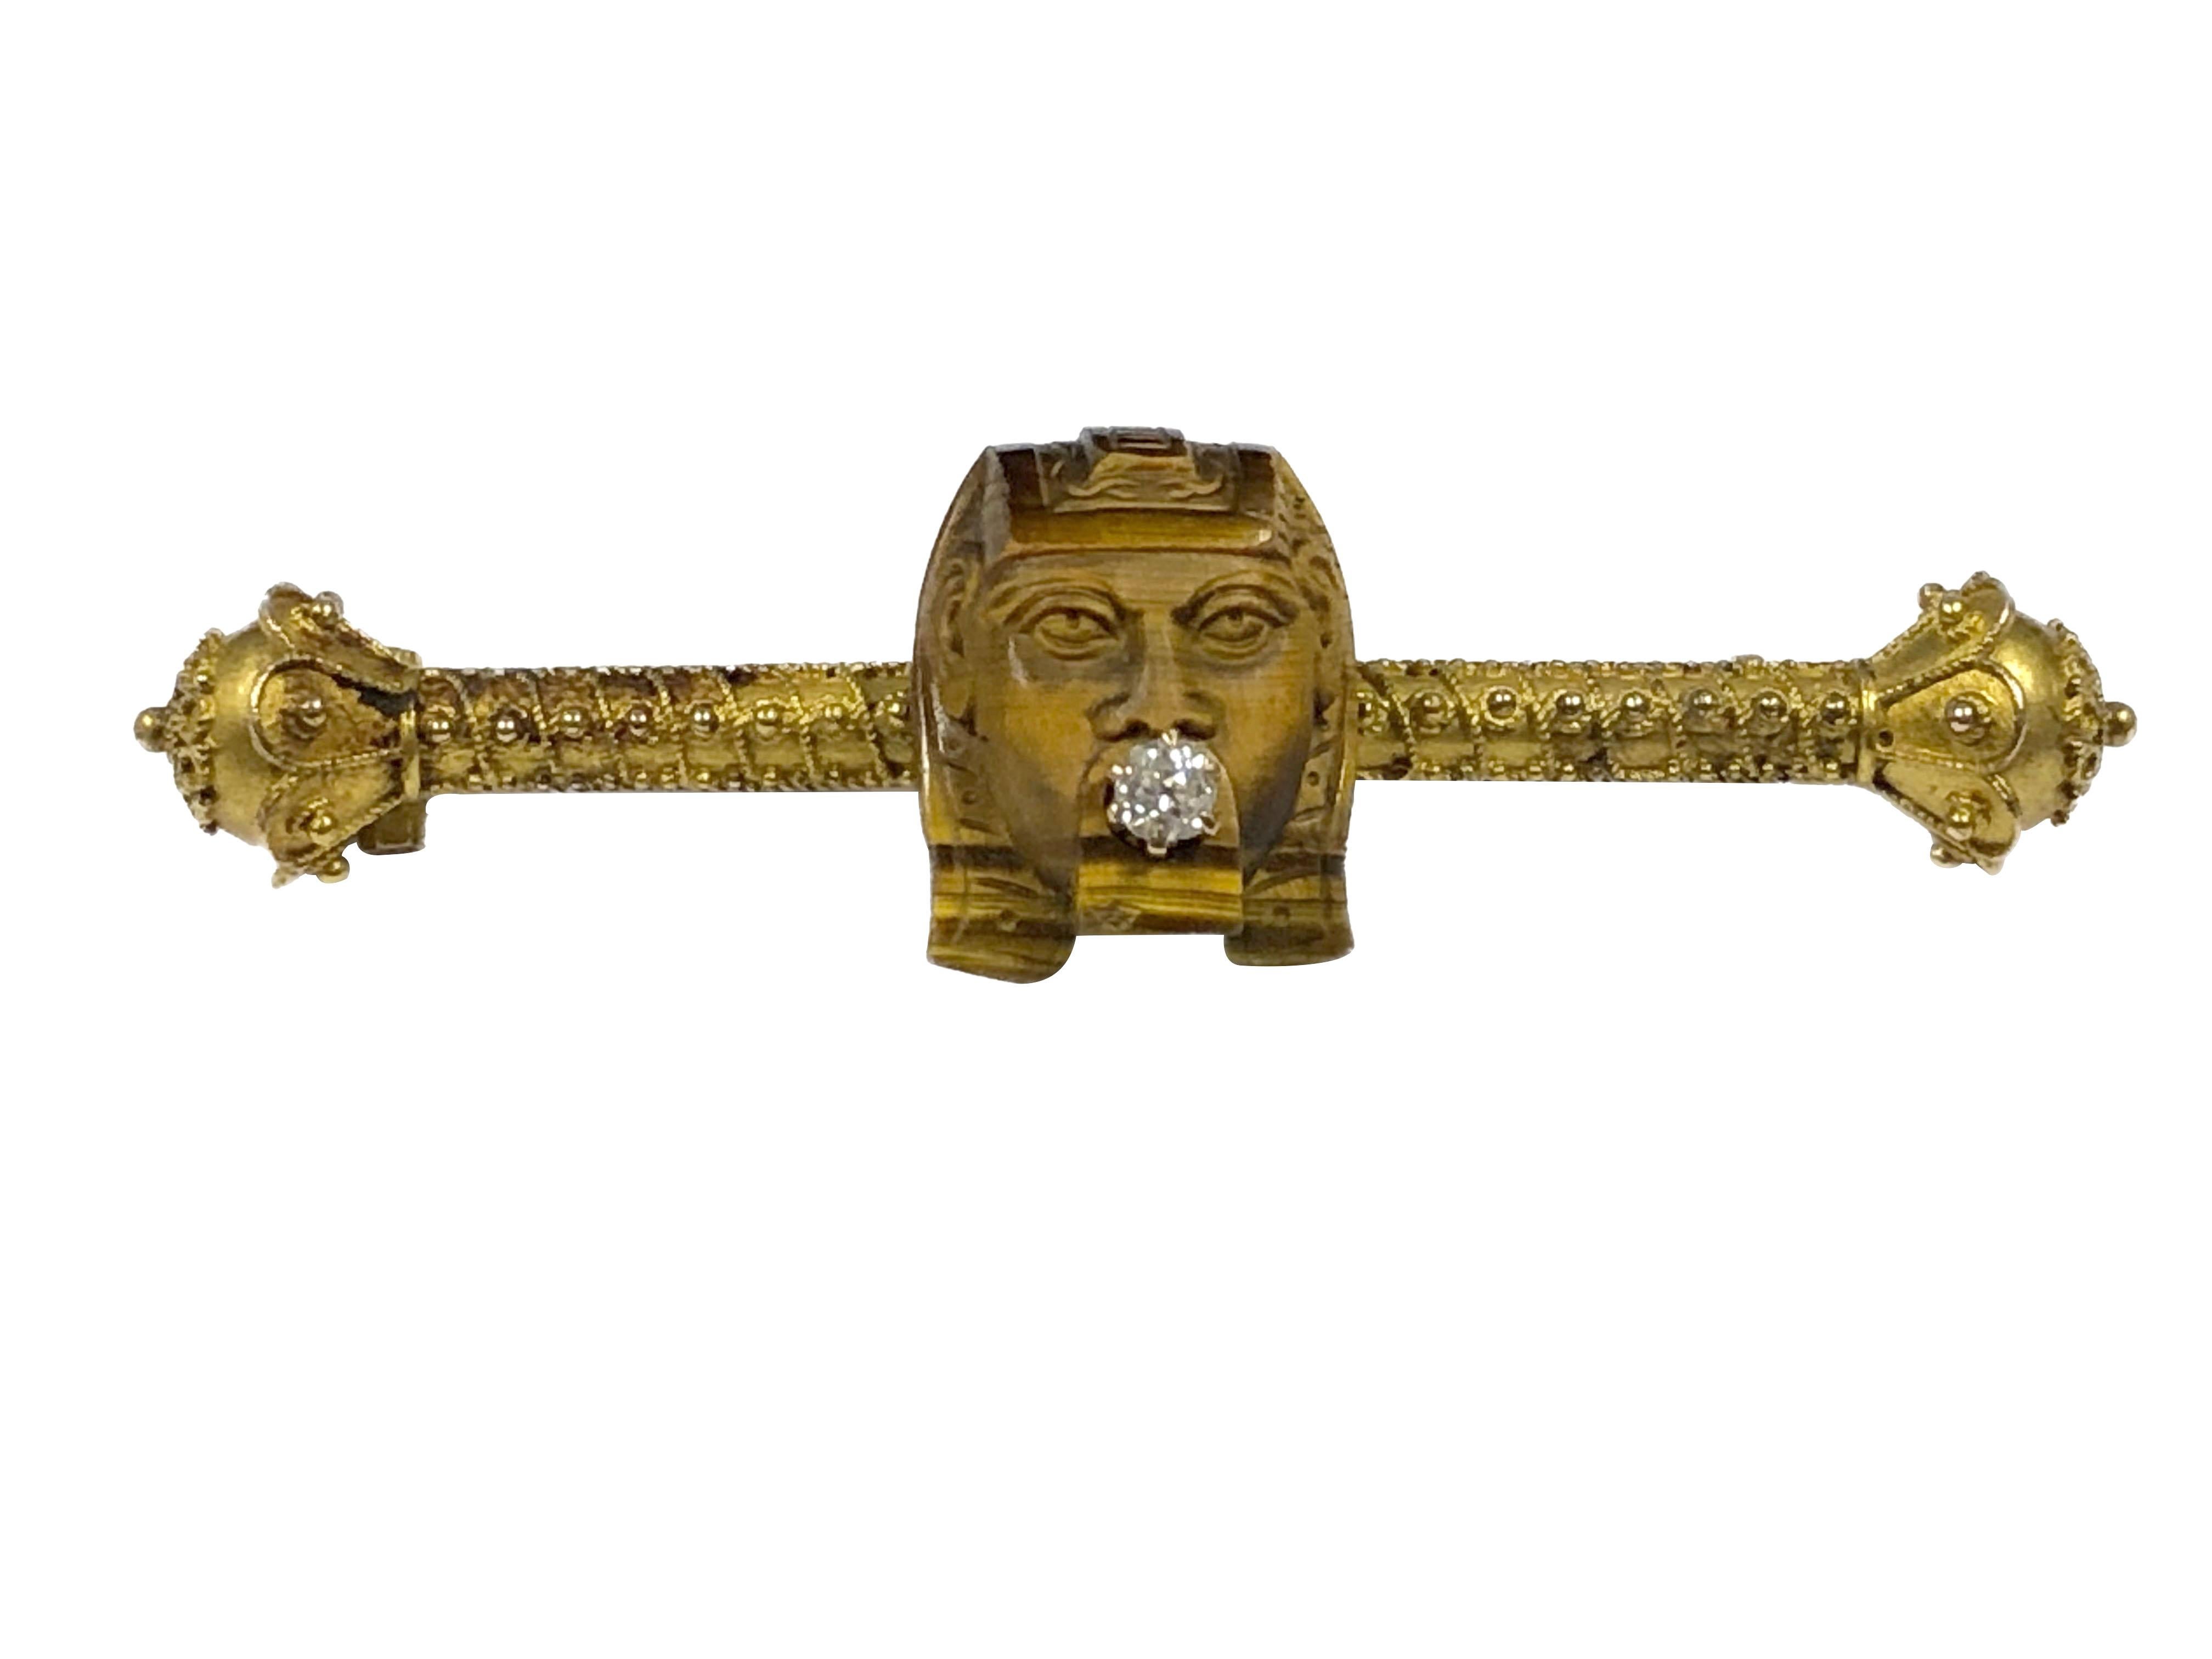 Circa 1880 - 1890 14K Yellow Gold, Egyptian Revival Brooch, measuring 2 1/4 inches in length and having fine Etuskan Granulation work, centered by a Carved Tigers eye stone Sphinx with an old mine cut Diamond set into the Mouth. 